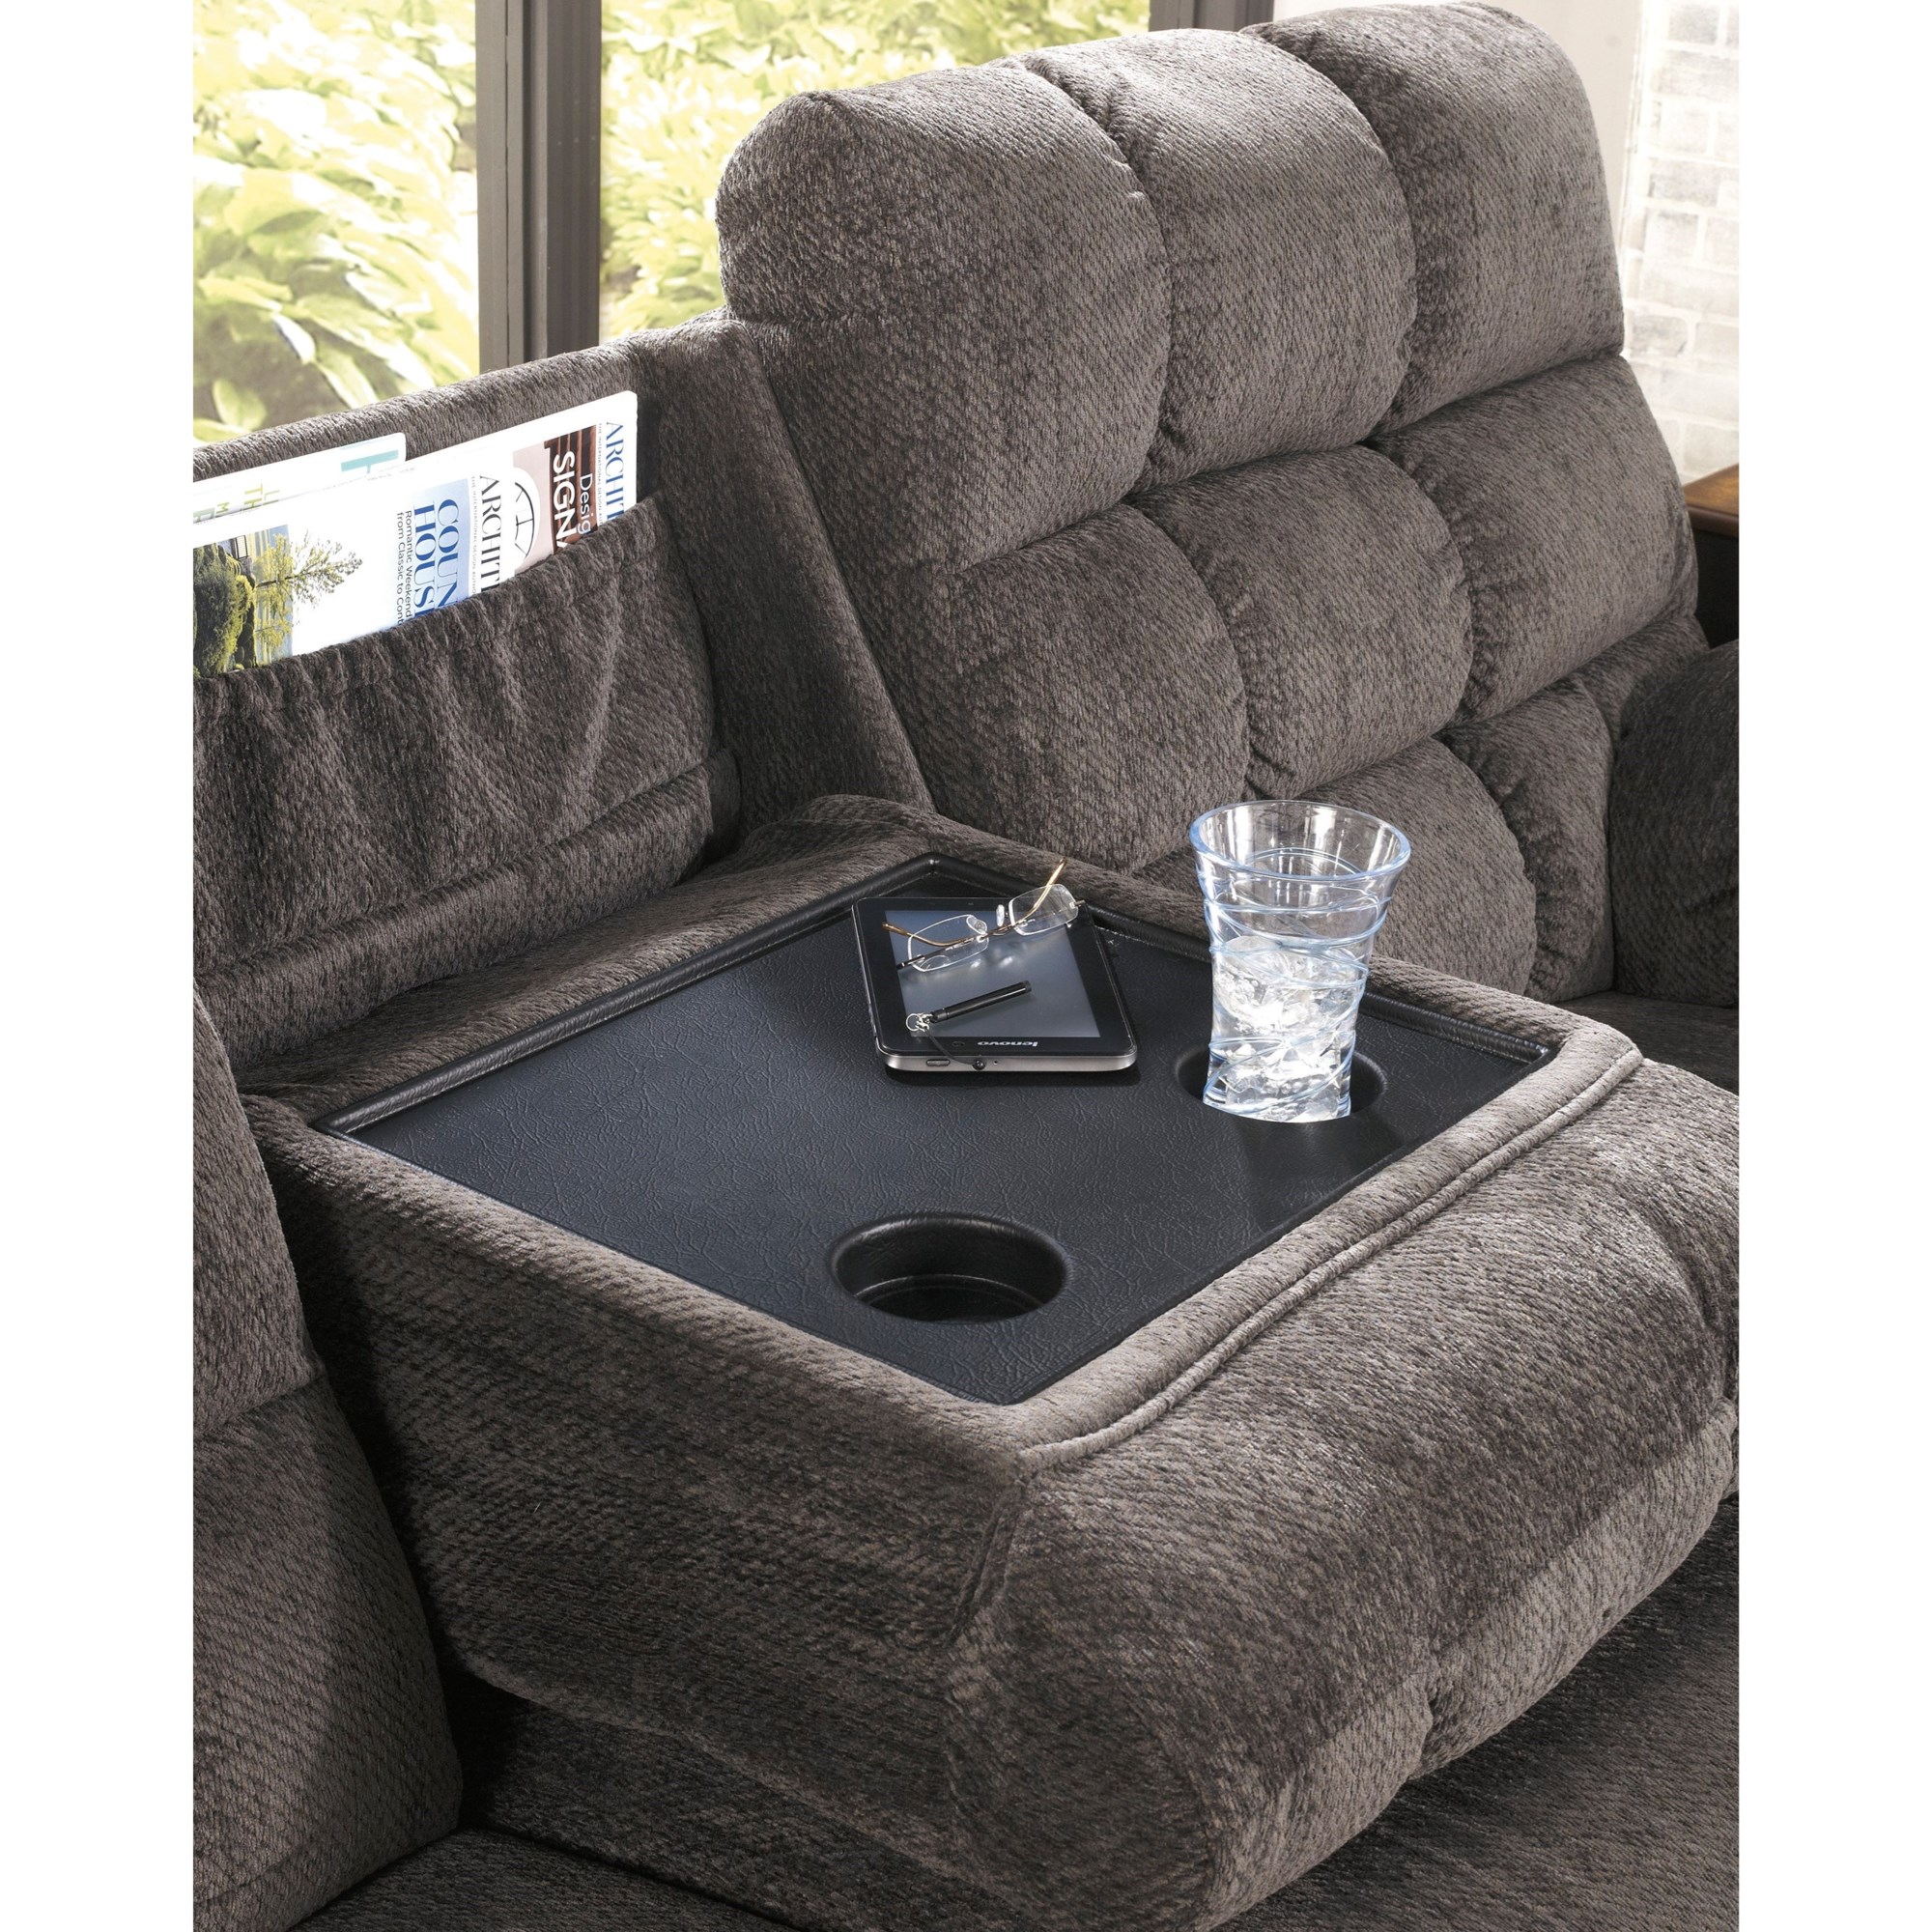 ARRA Horizon Three Seater Tufted Back Sofa With Cupholder 3 Seater